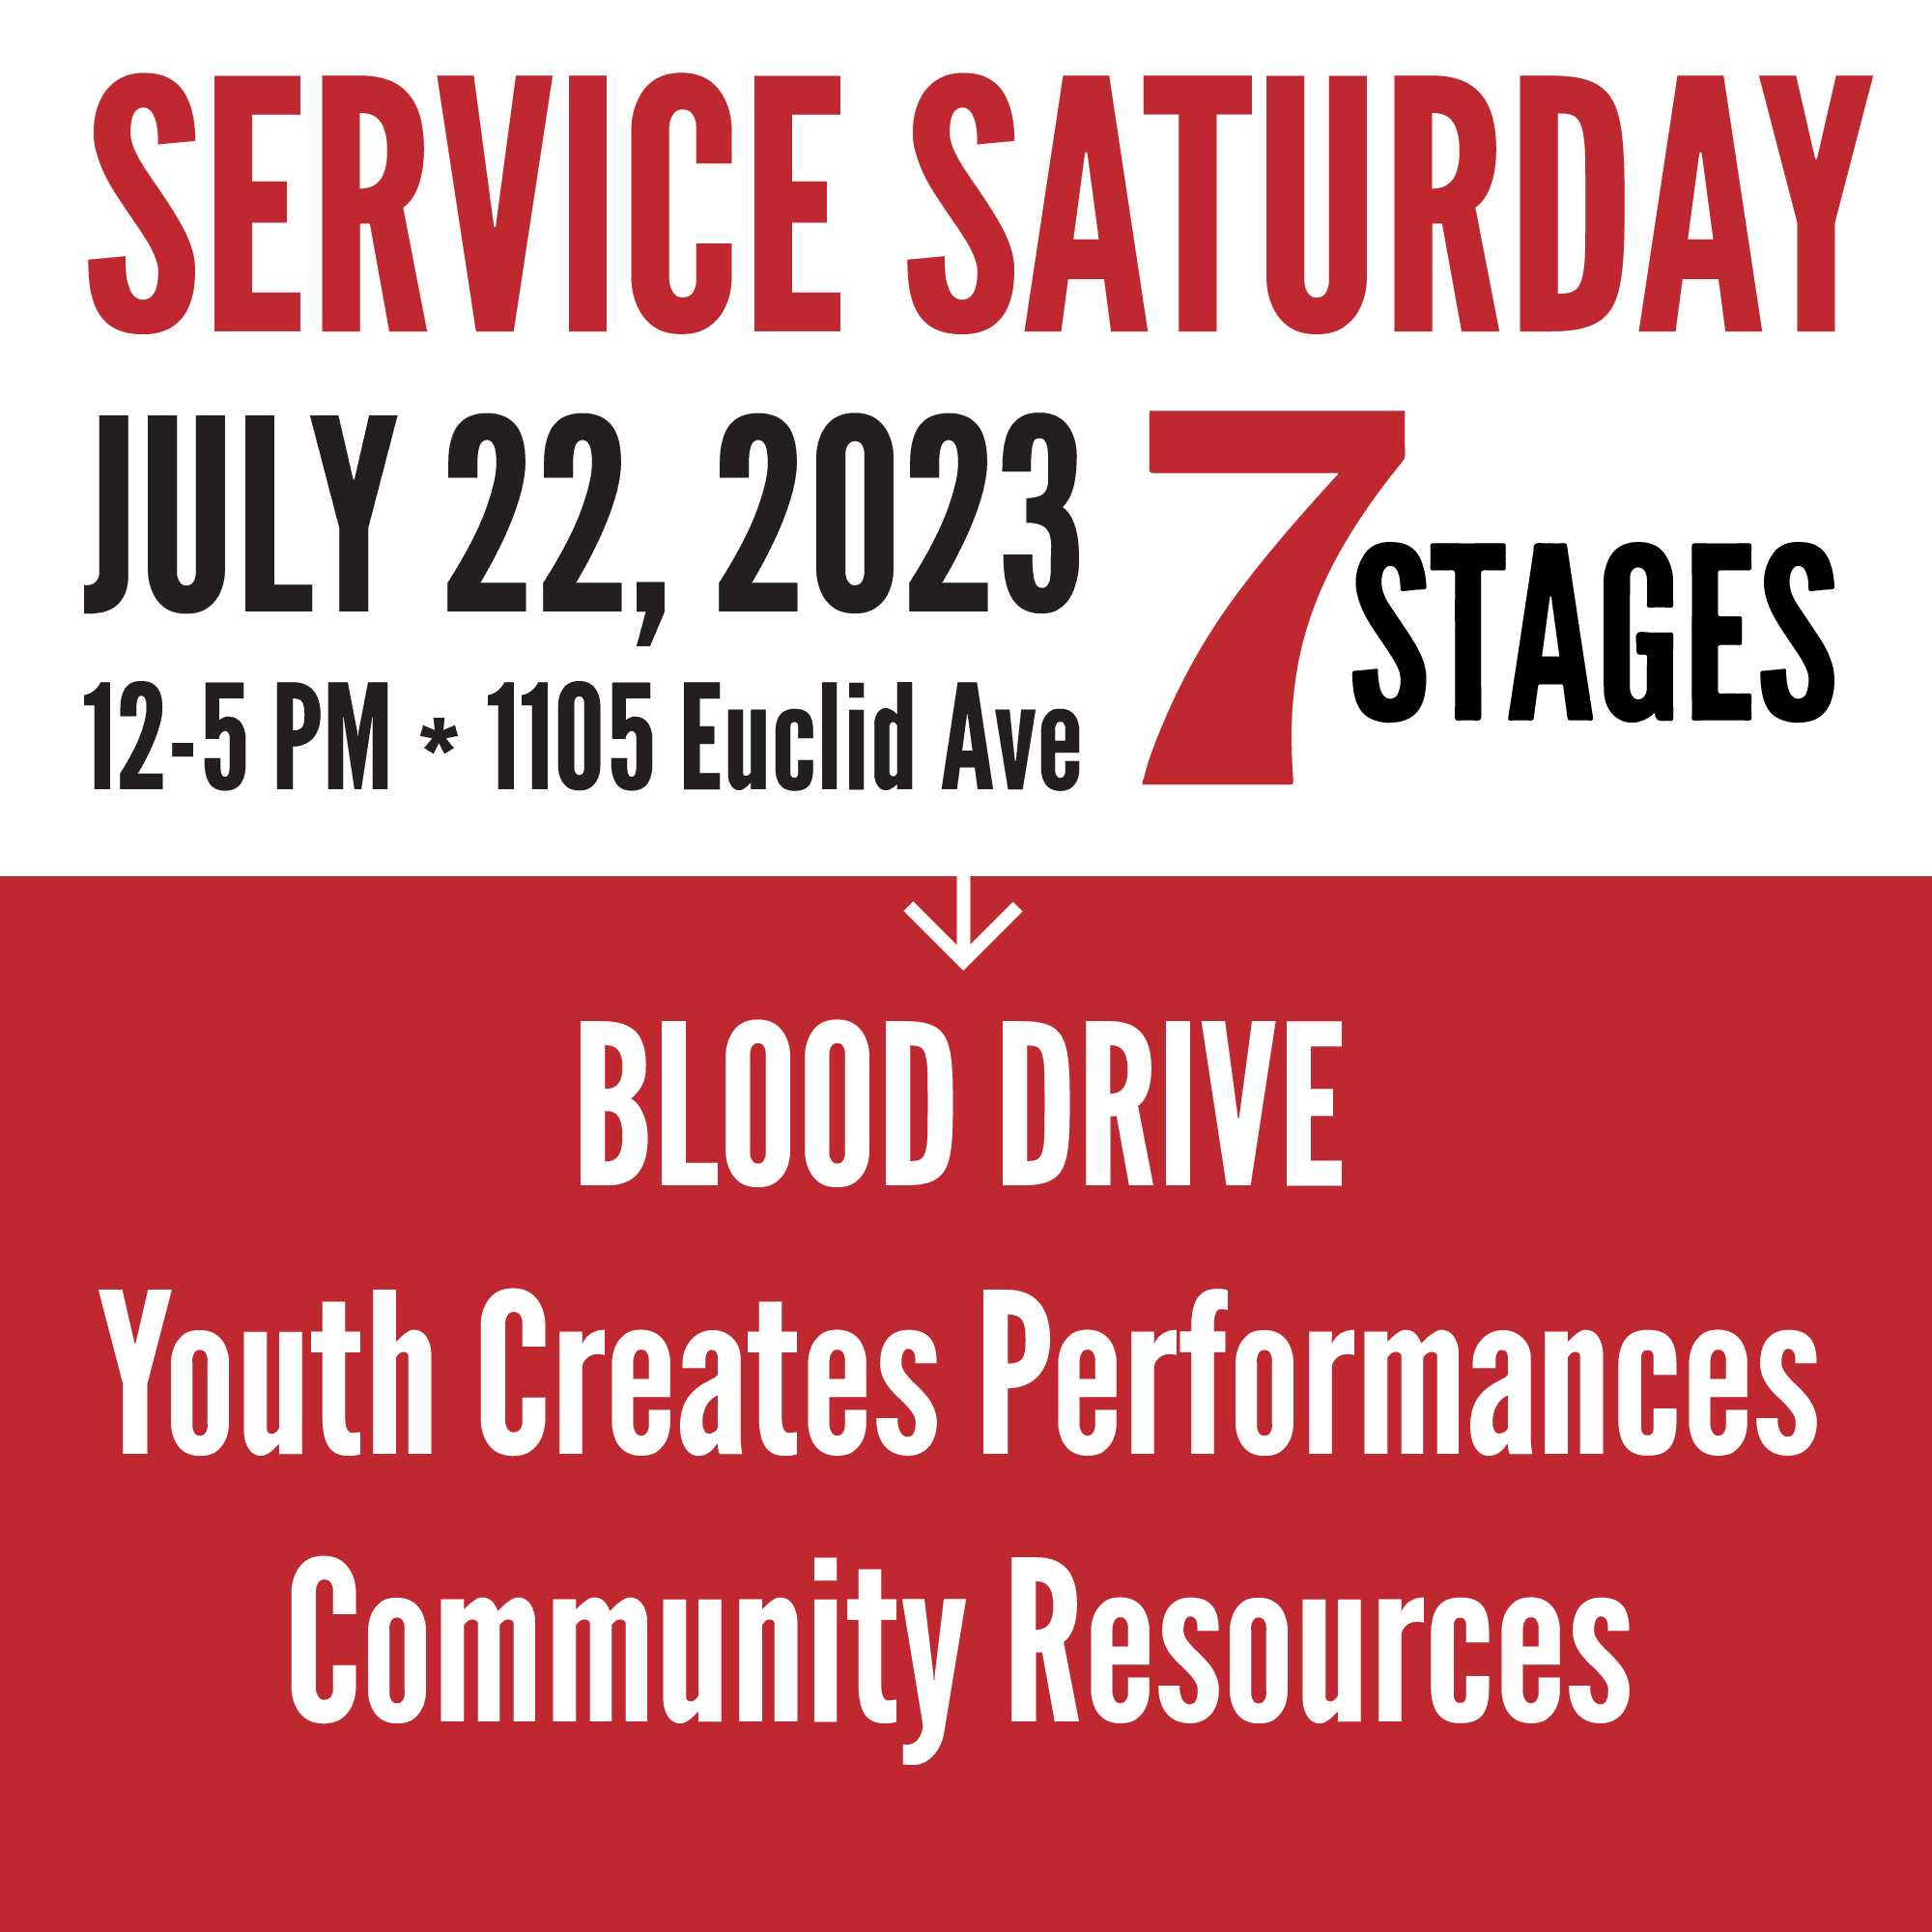 Service Saturday. July 22, 2023. 12-5 pm. 1105 Euclid Ave. 7 Stages. Blood Drive, Youth Creates Performances, Community Resources.